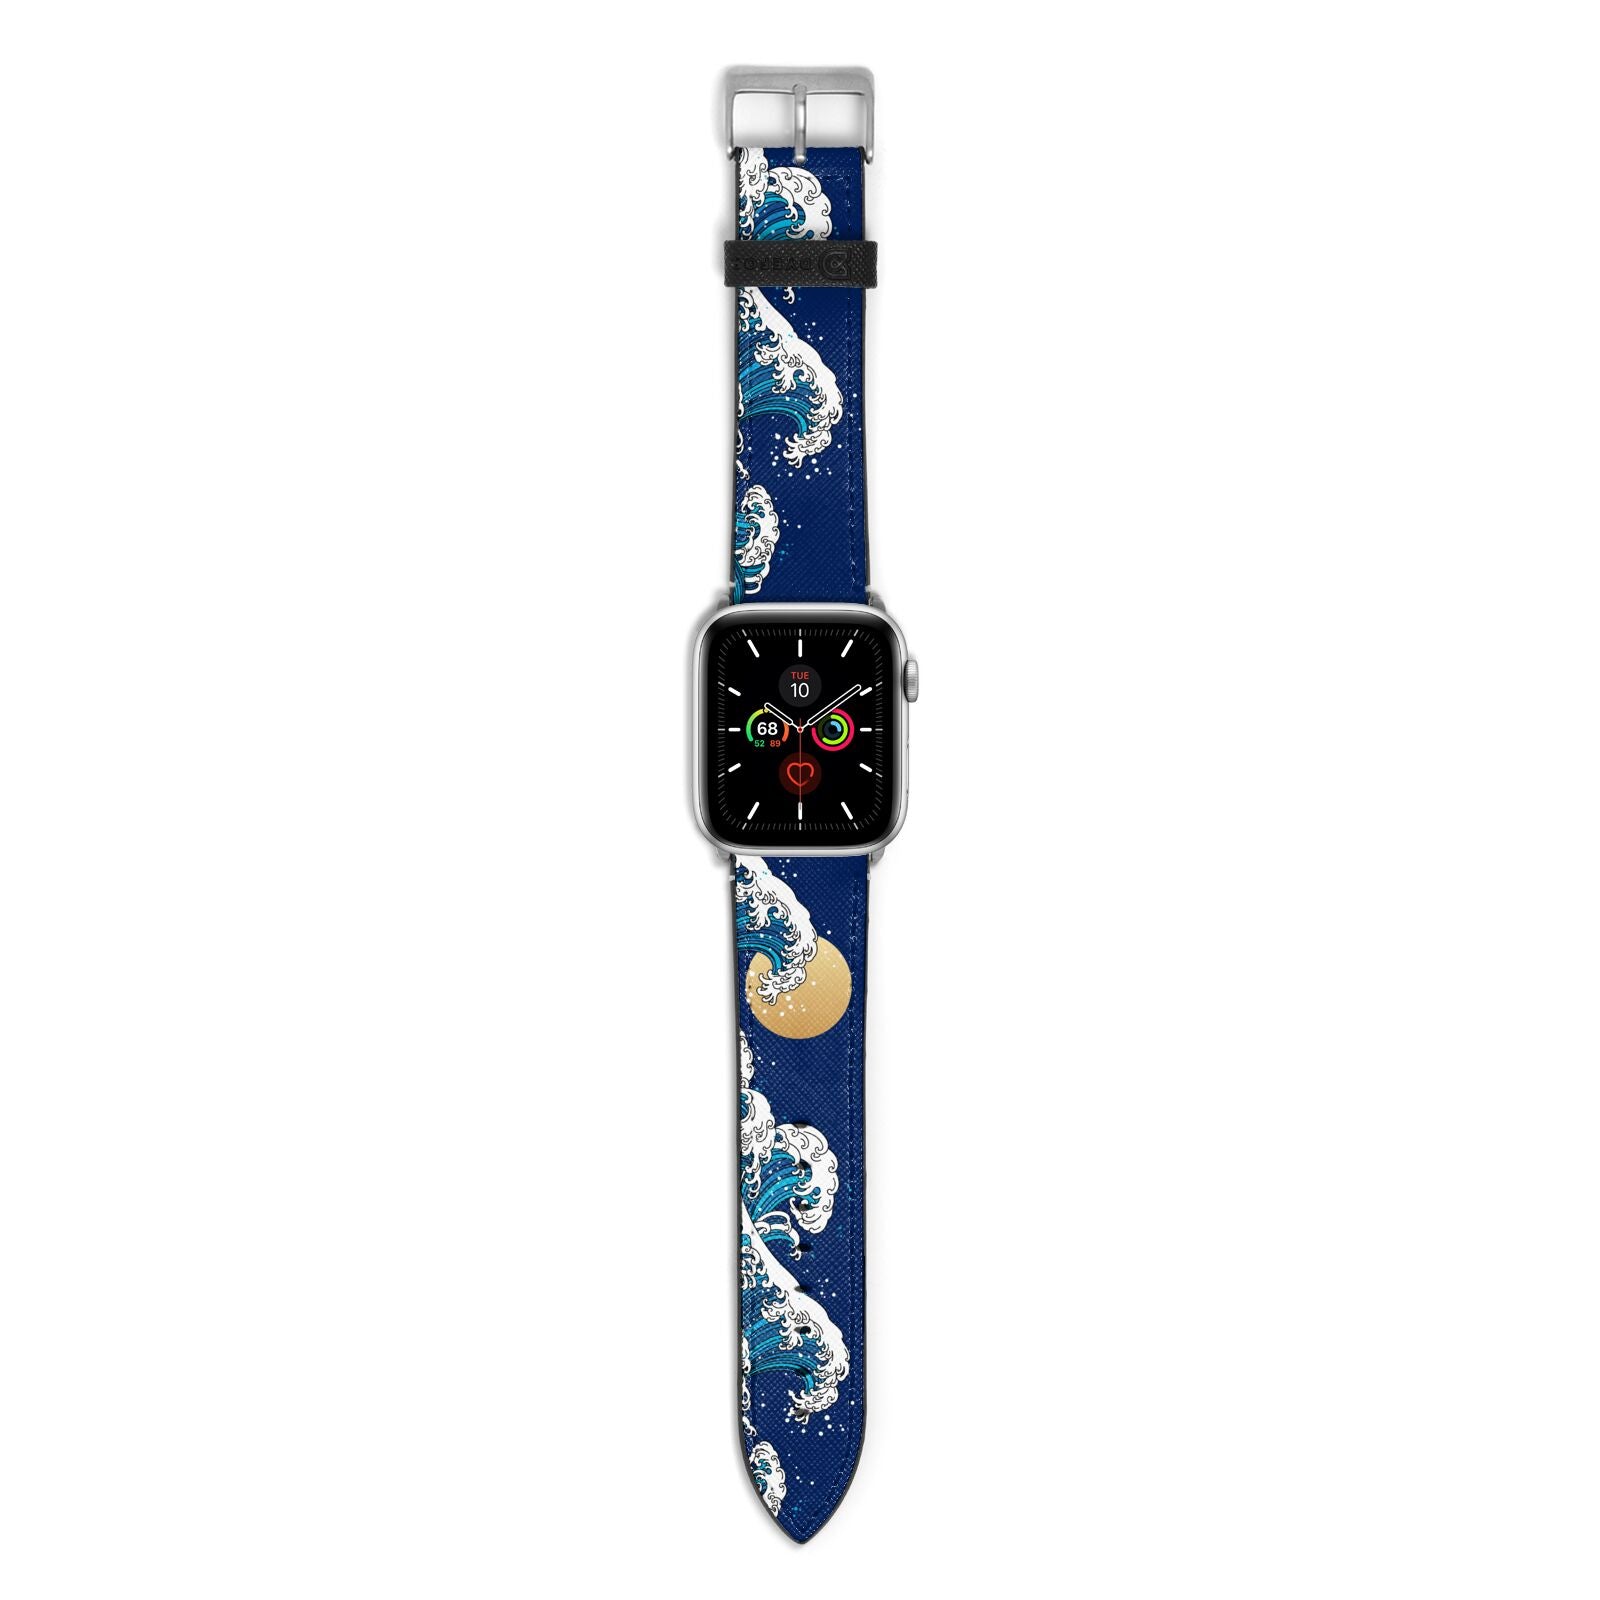 Hokusai Japanese Waves Apple Watch Strap with Silver Hardware